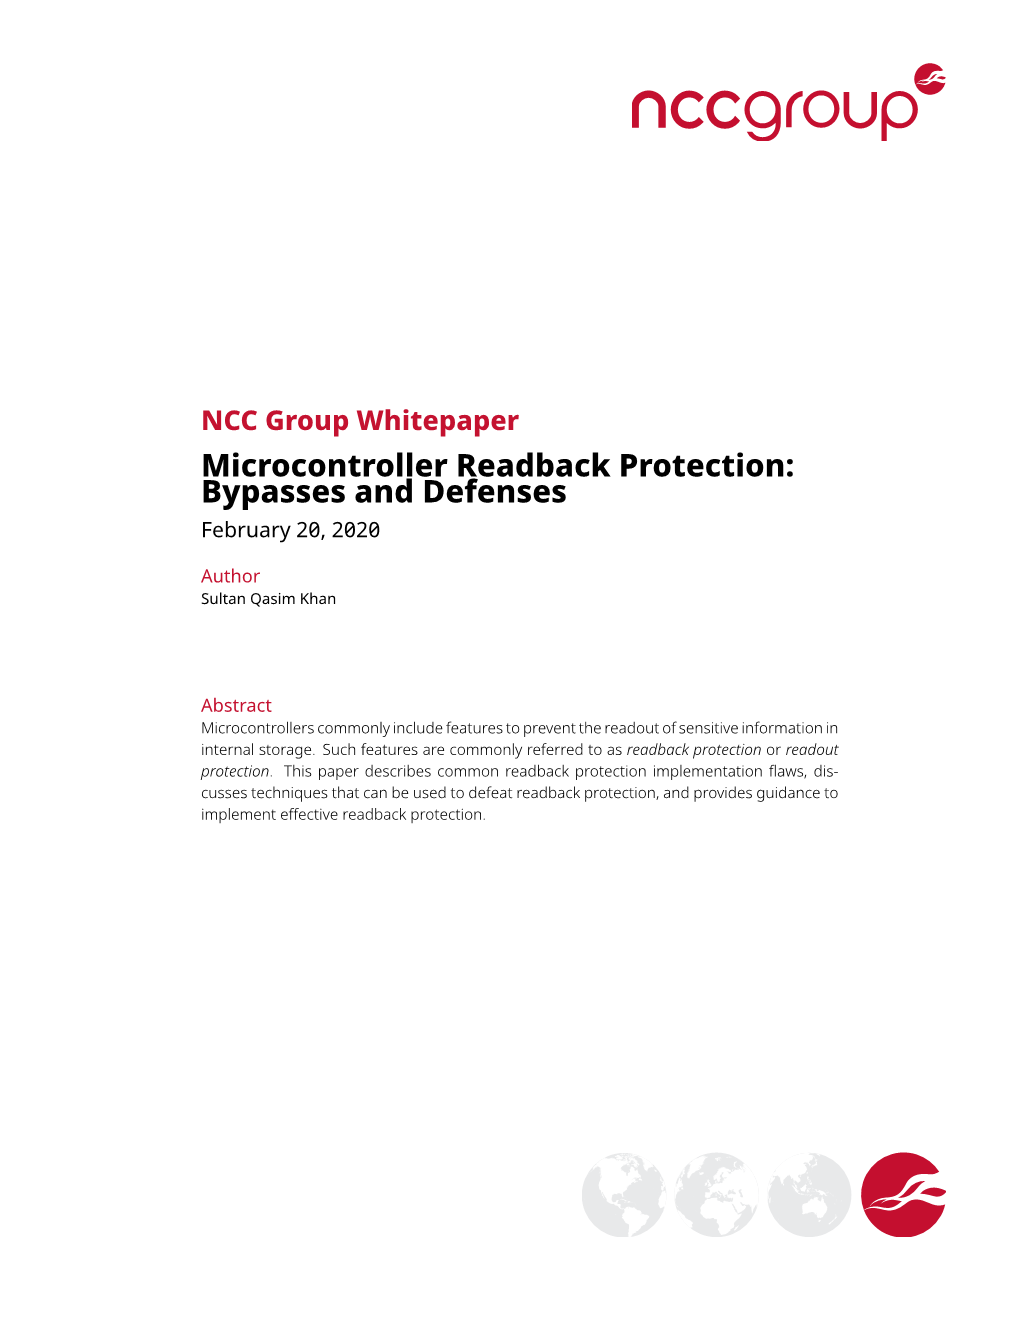 Microcontroller Readback Protection: Bypasses and Defenses February 20, 2020